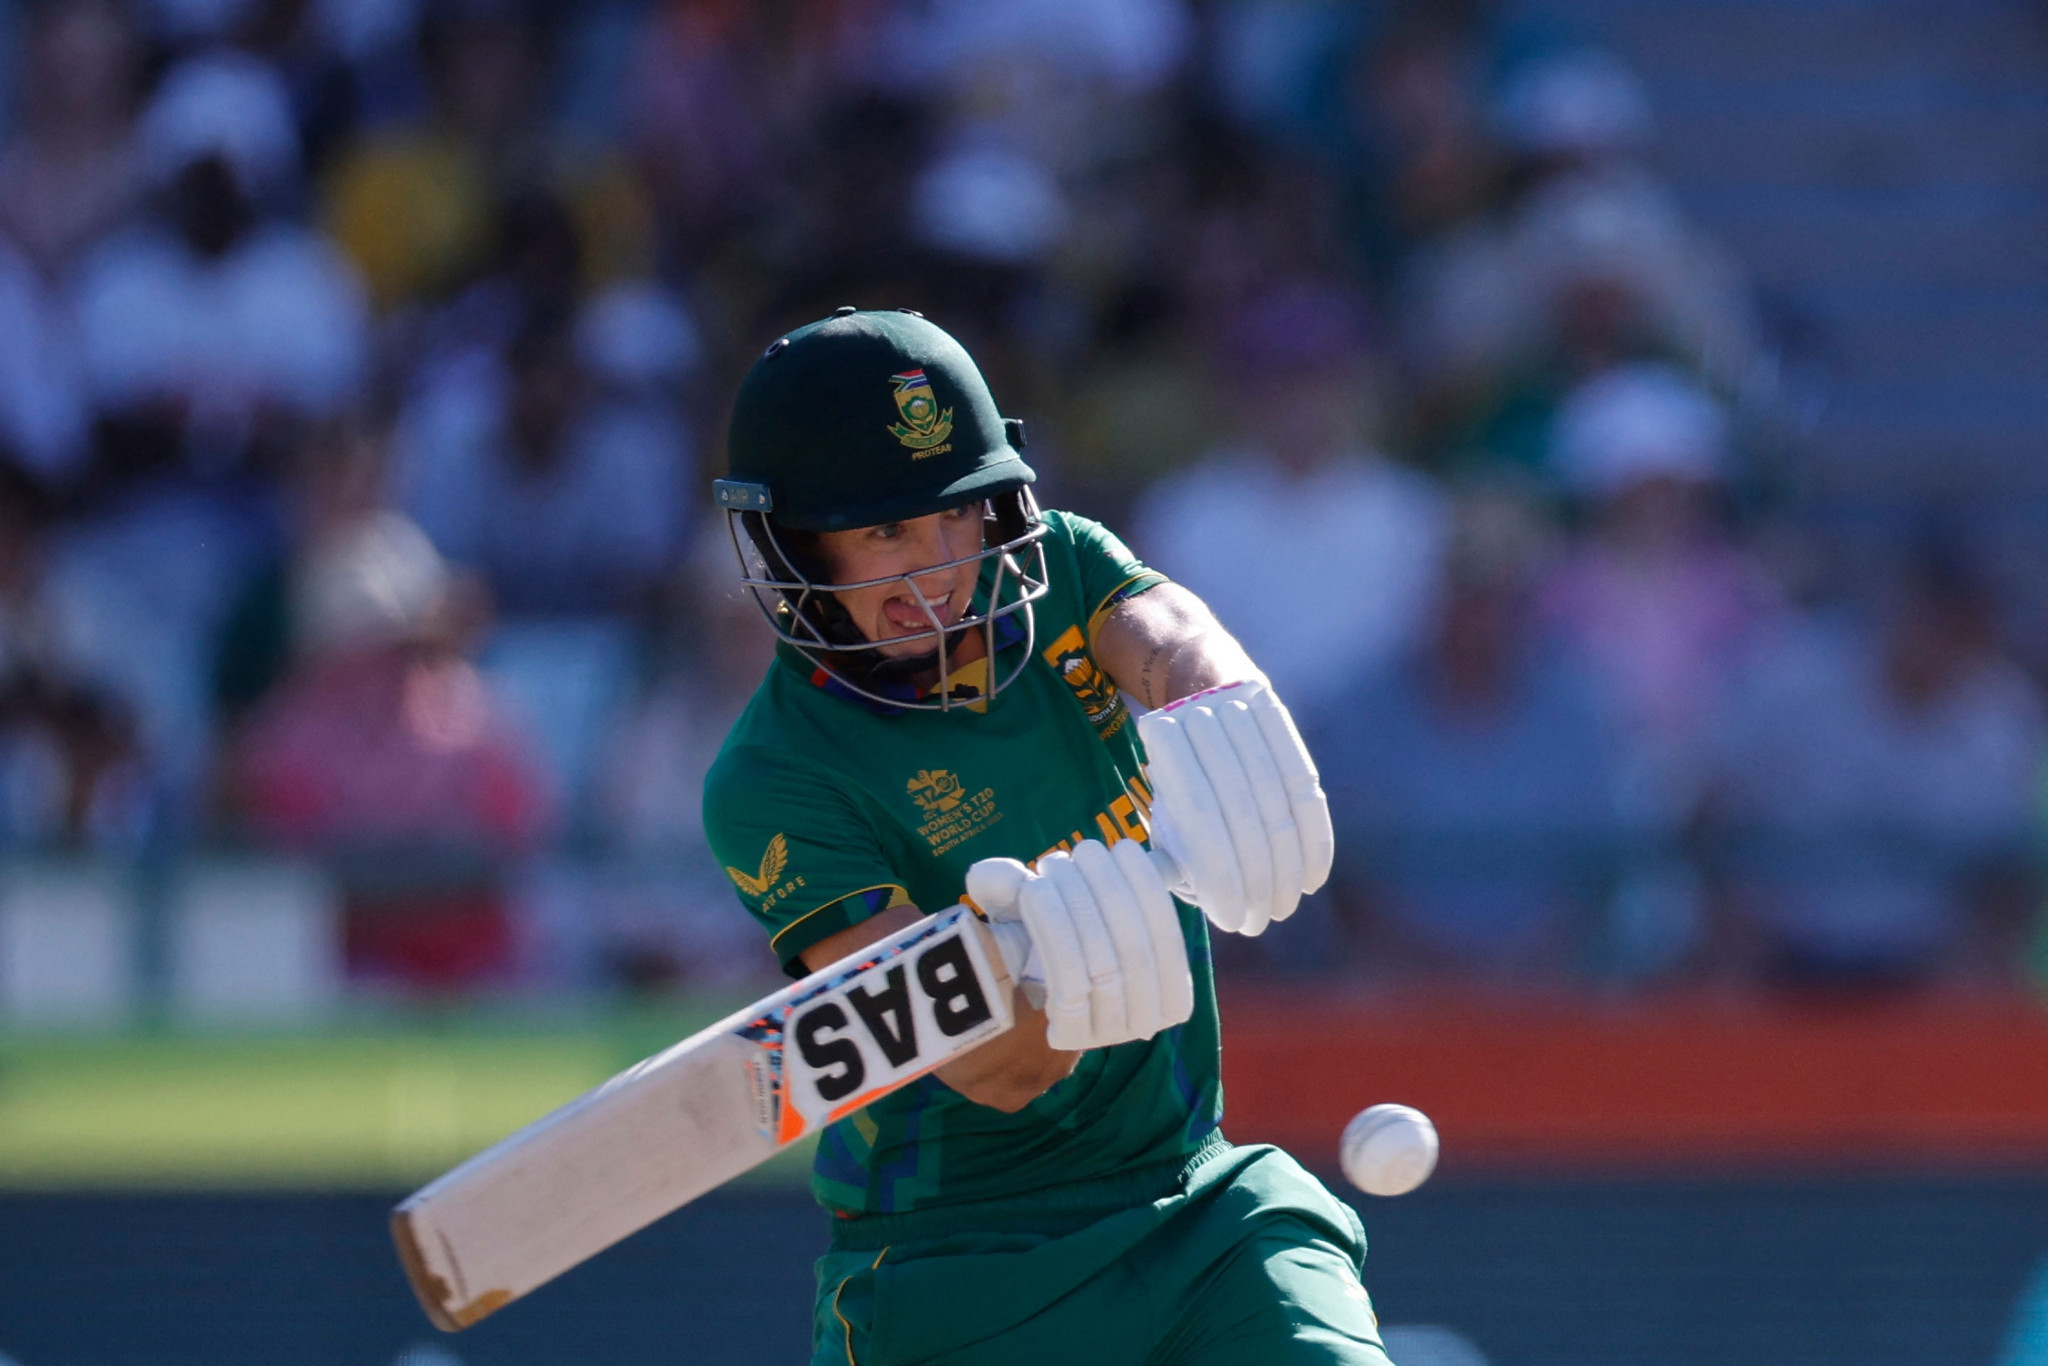 South African cricketer Tazmin Brits says she believes cricket would benefit from exposure to a wider audience if it can secure a place at the Olympics ©Getty Images